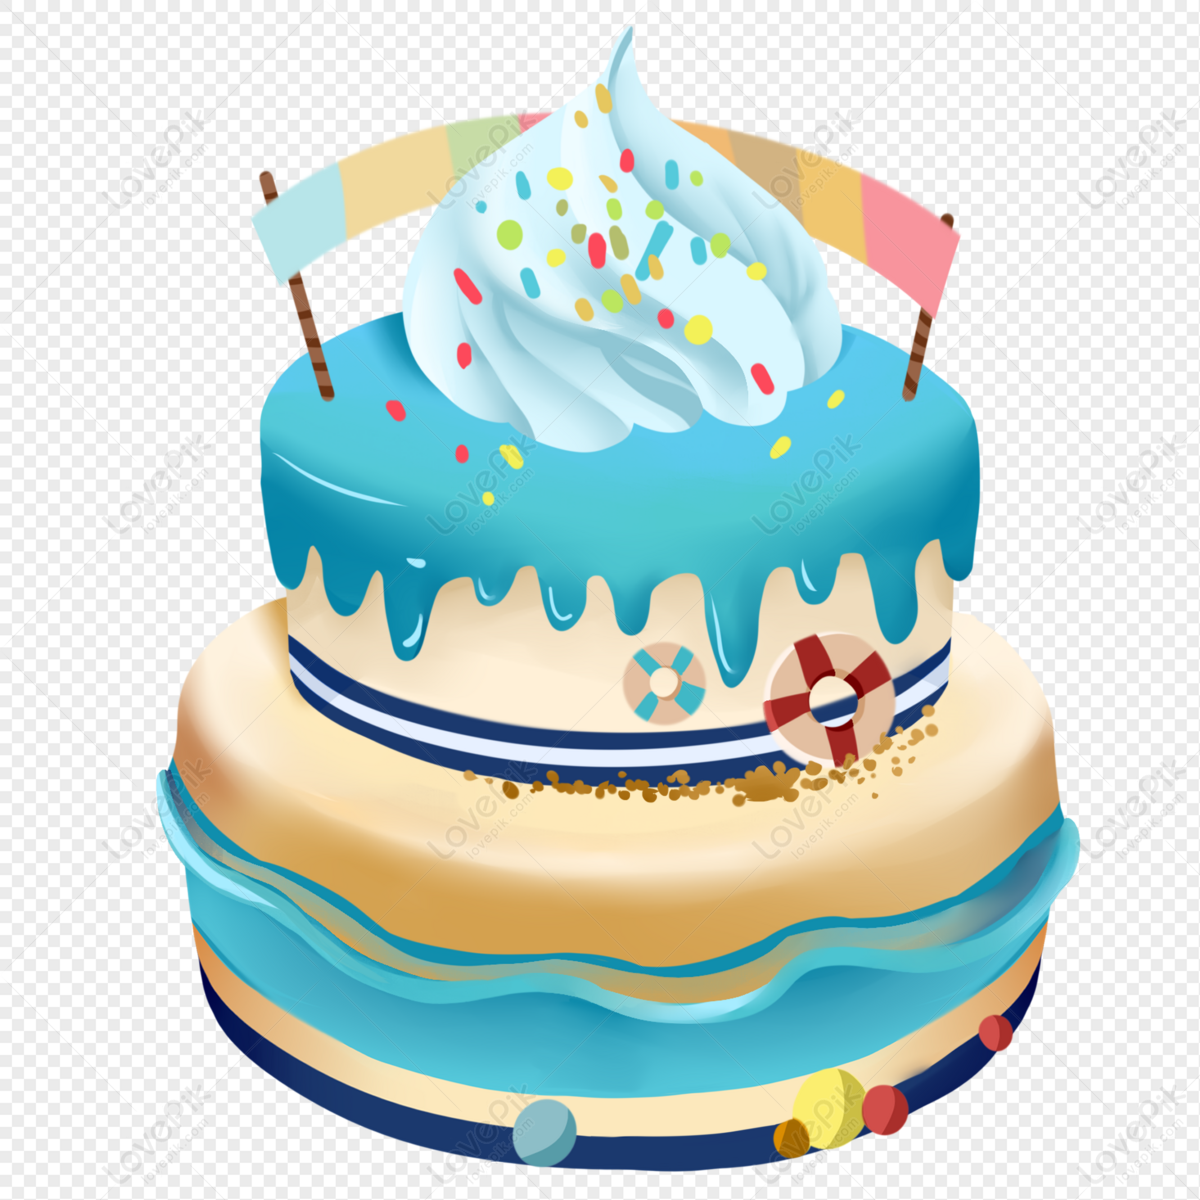 Birthday Cake Images Download - Birthday Cake Clip Art Png - Free  Transparent PNG Clipart Images Download